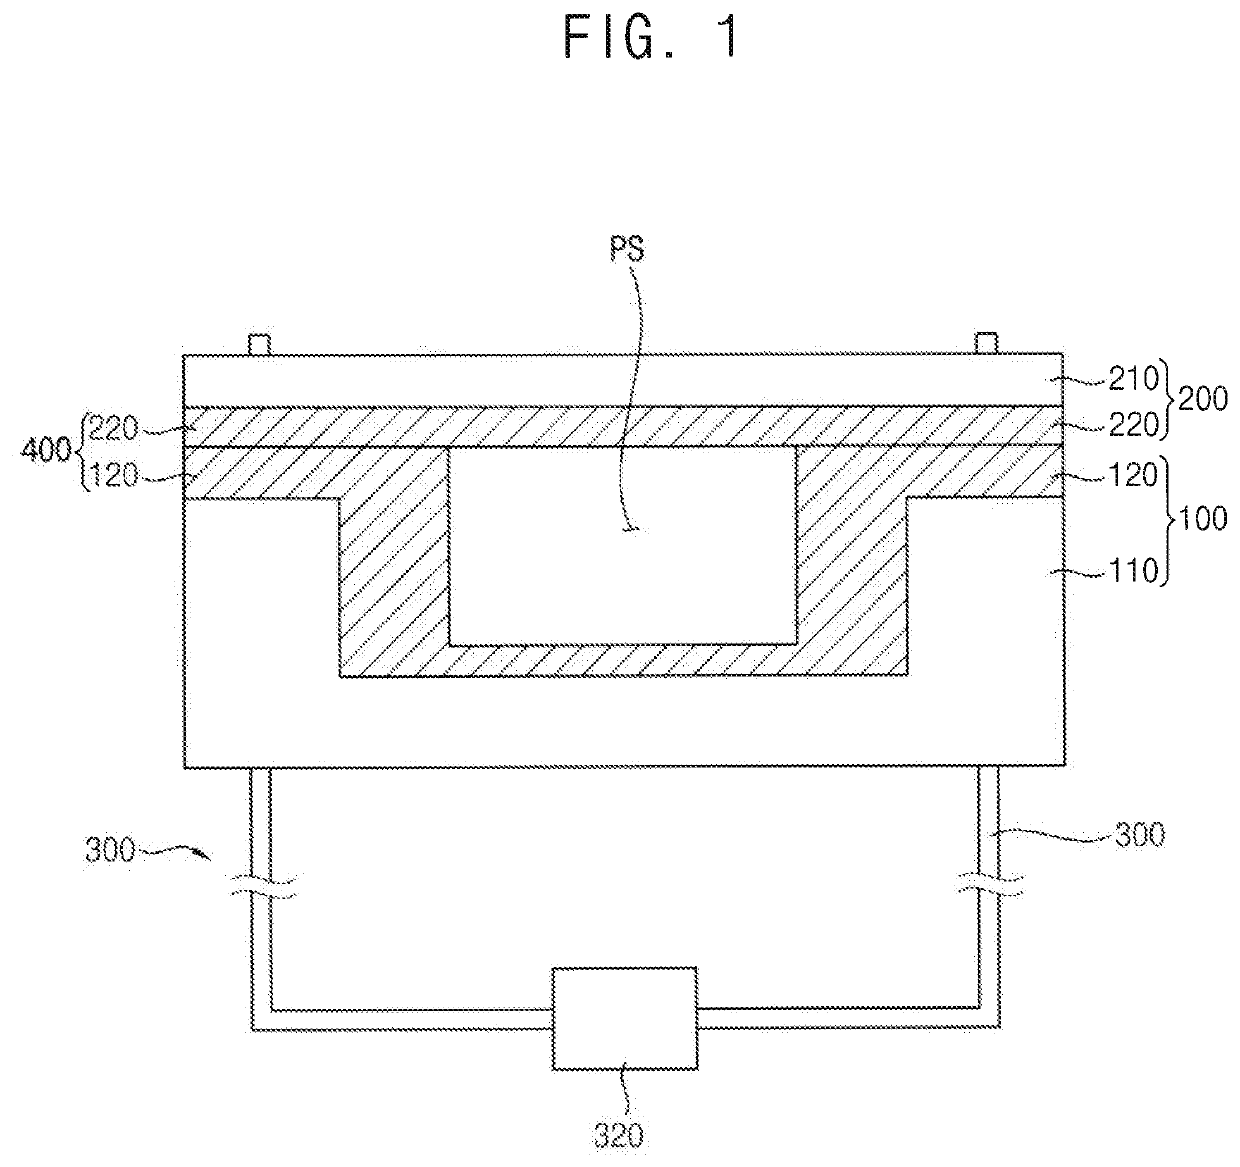 Process chamber for a supercritical process and apparatus for treating substrates having the same